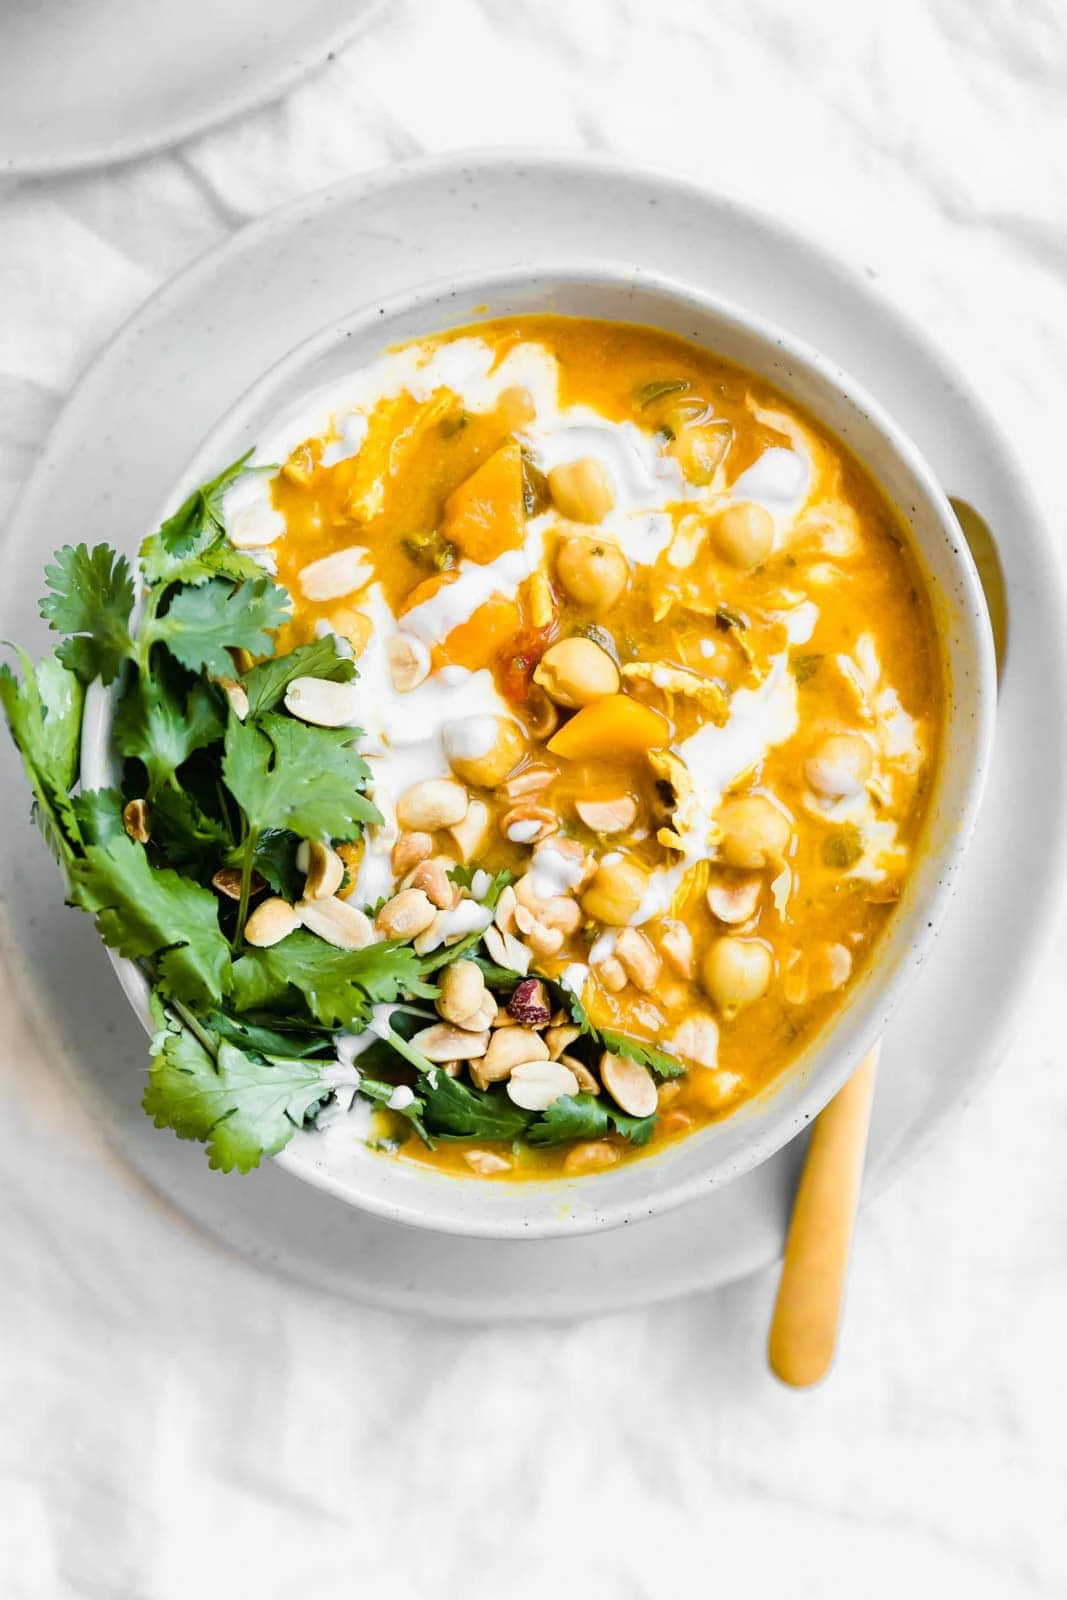 Cooked on low heat for 2 hours, this thai-spiced coconut chicken chickpea sweet potato soup is the best soup I've ever had, hence the name: Dope Soup.